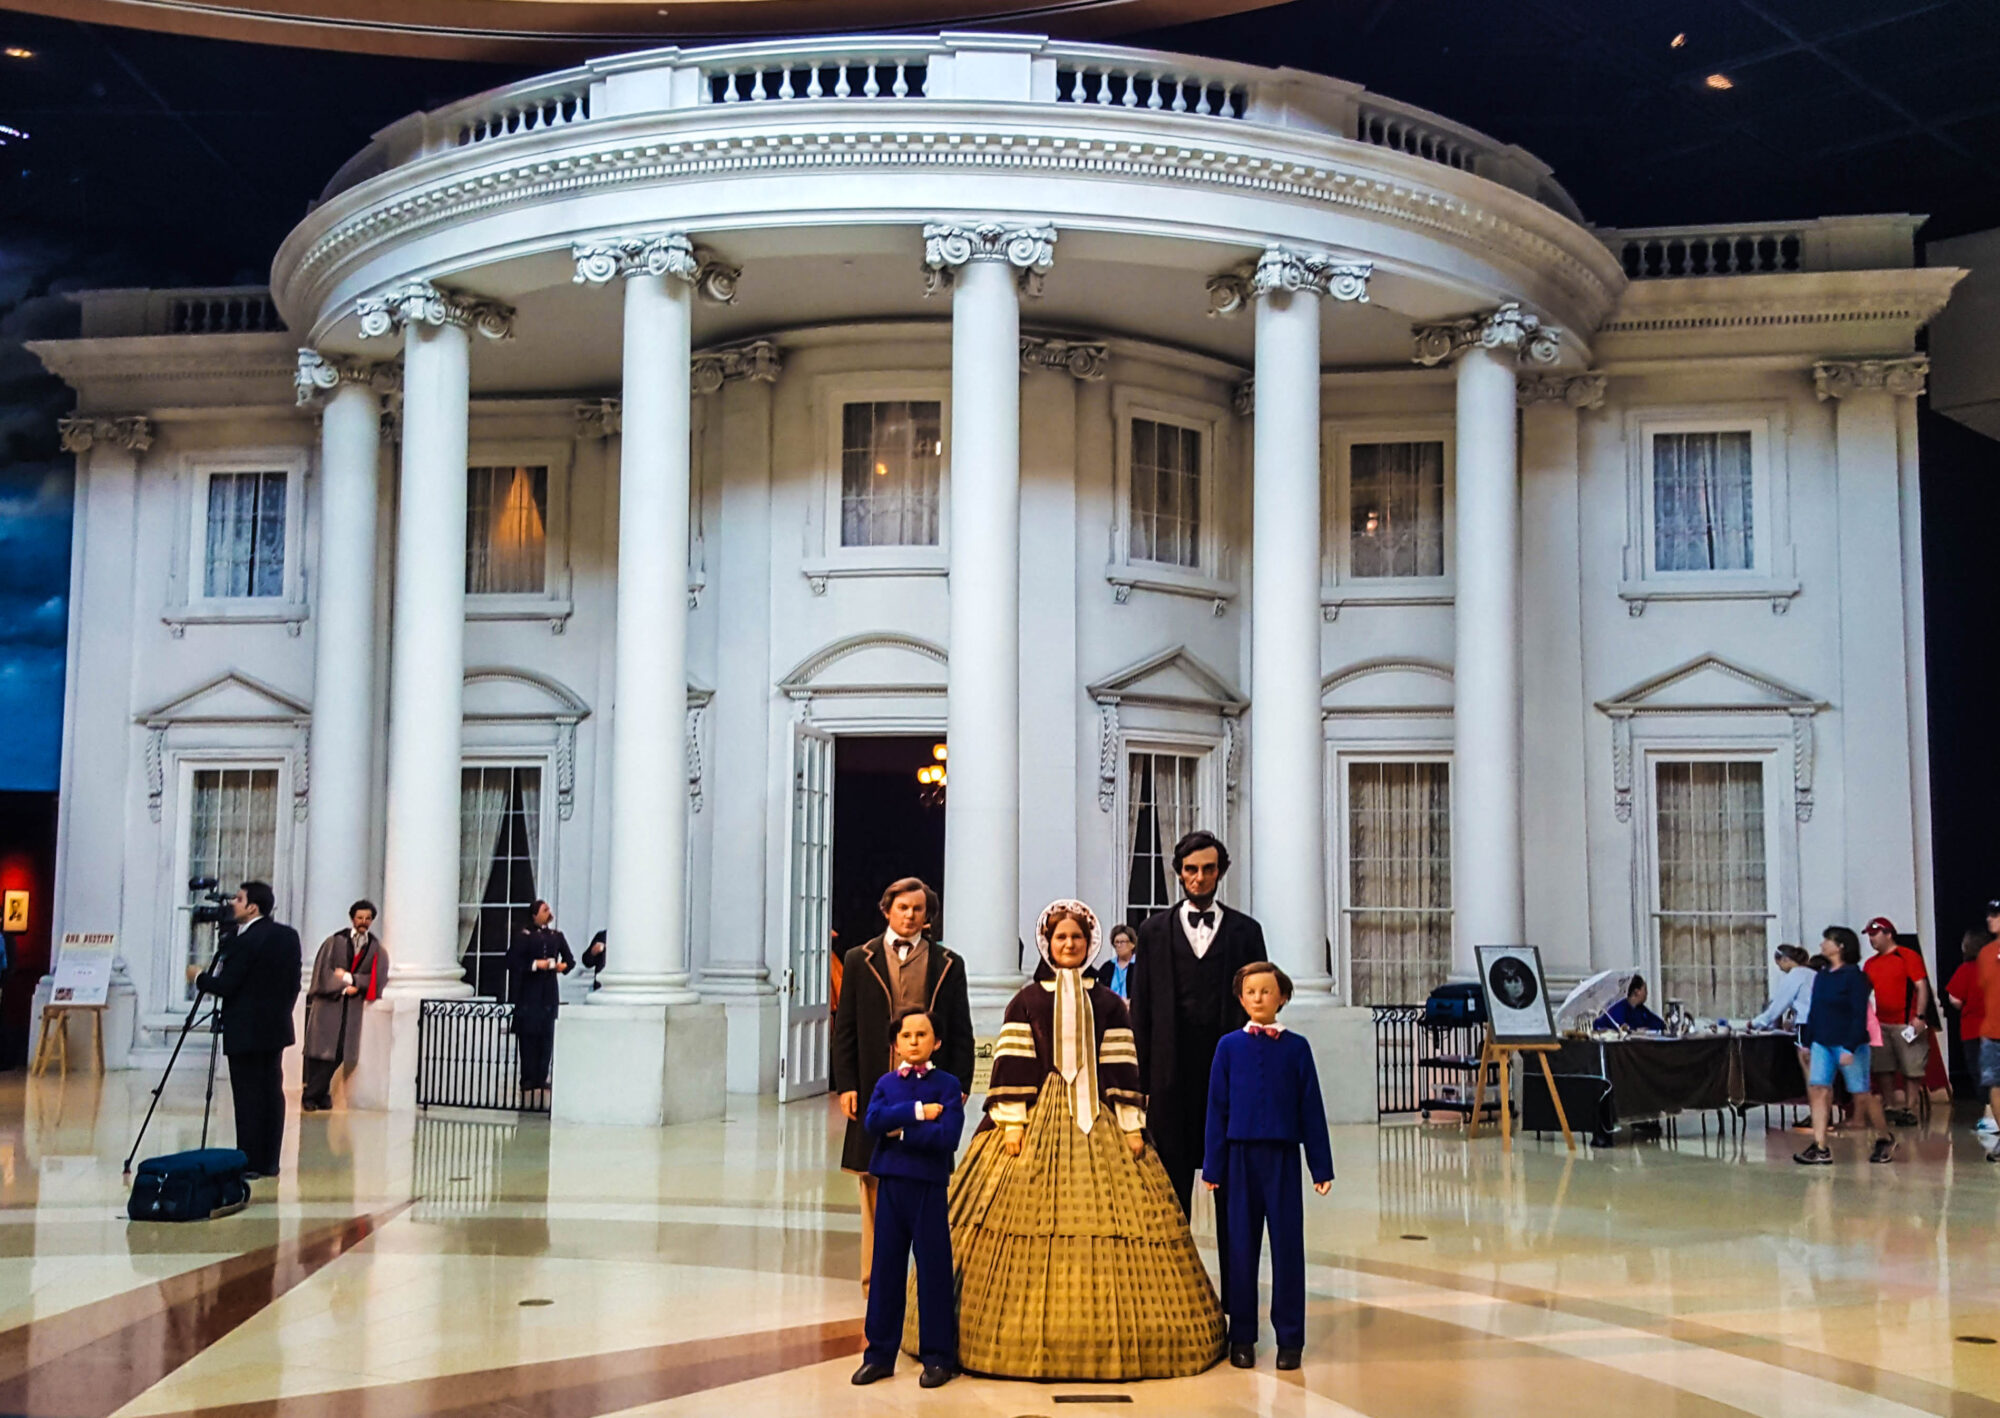 The Lincoln family at the White House